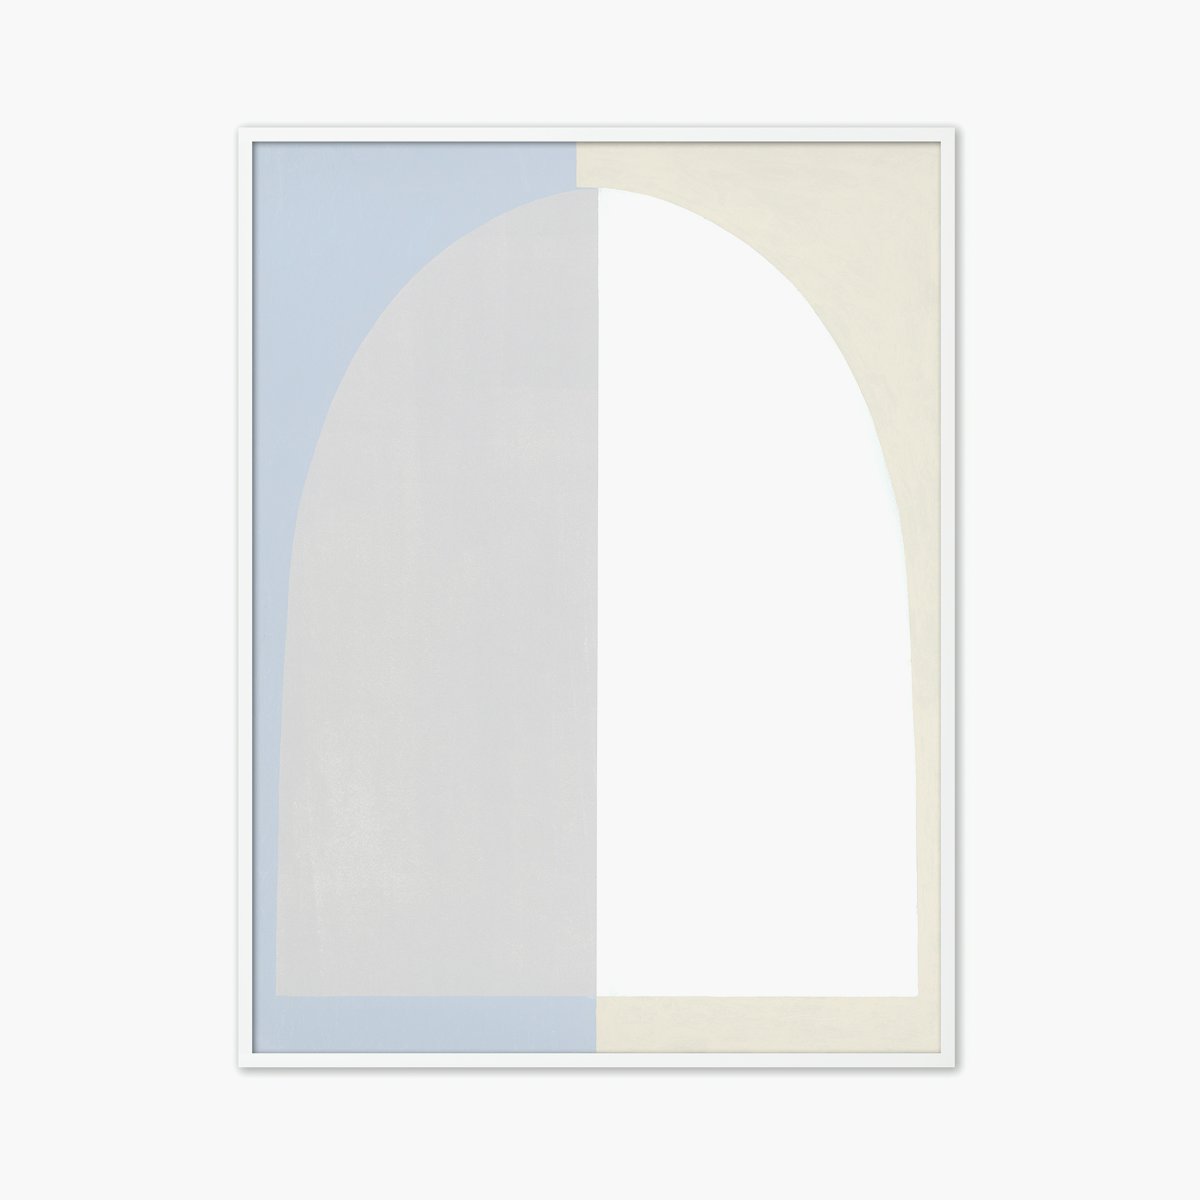 "Arch in Blue Shadow" by Aschely Vaughan Cone